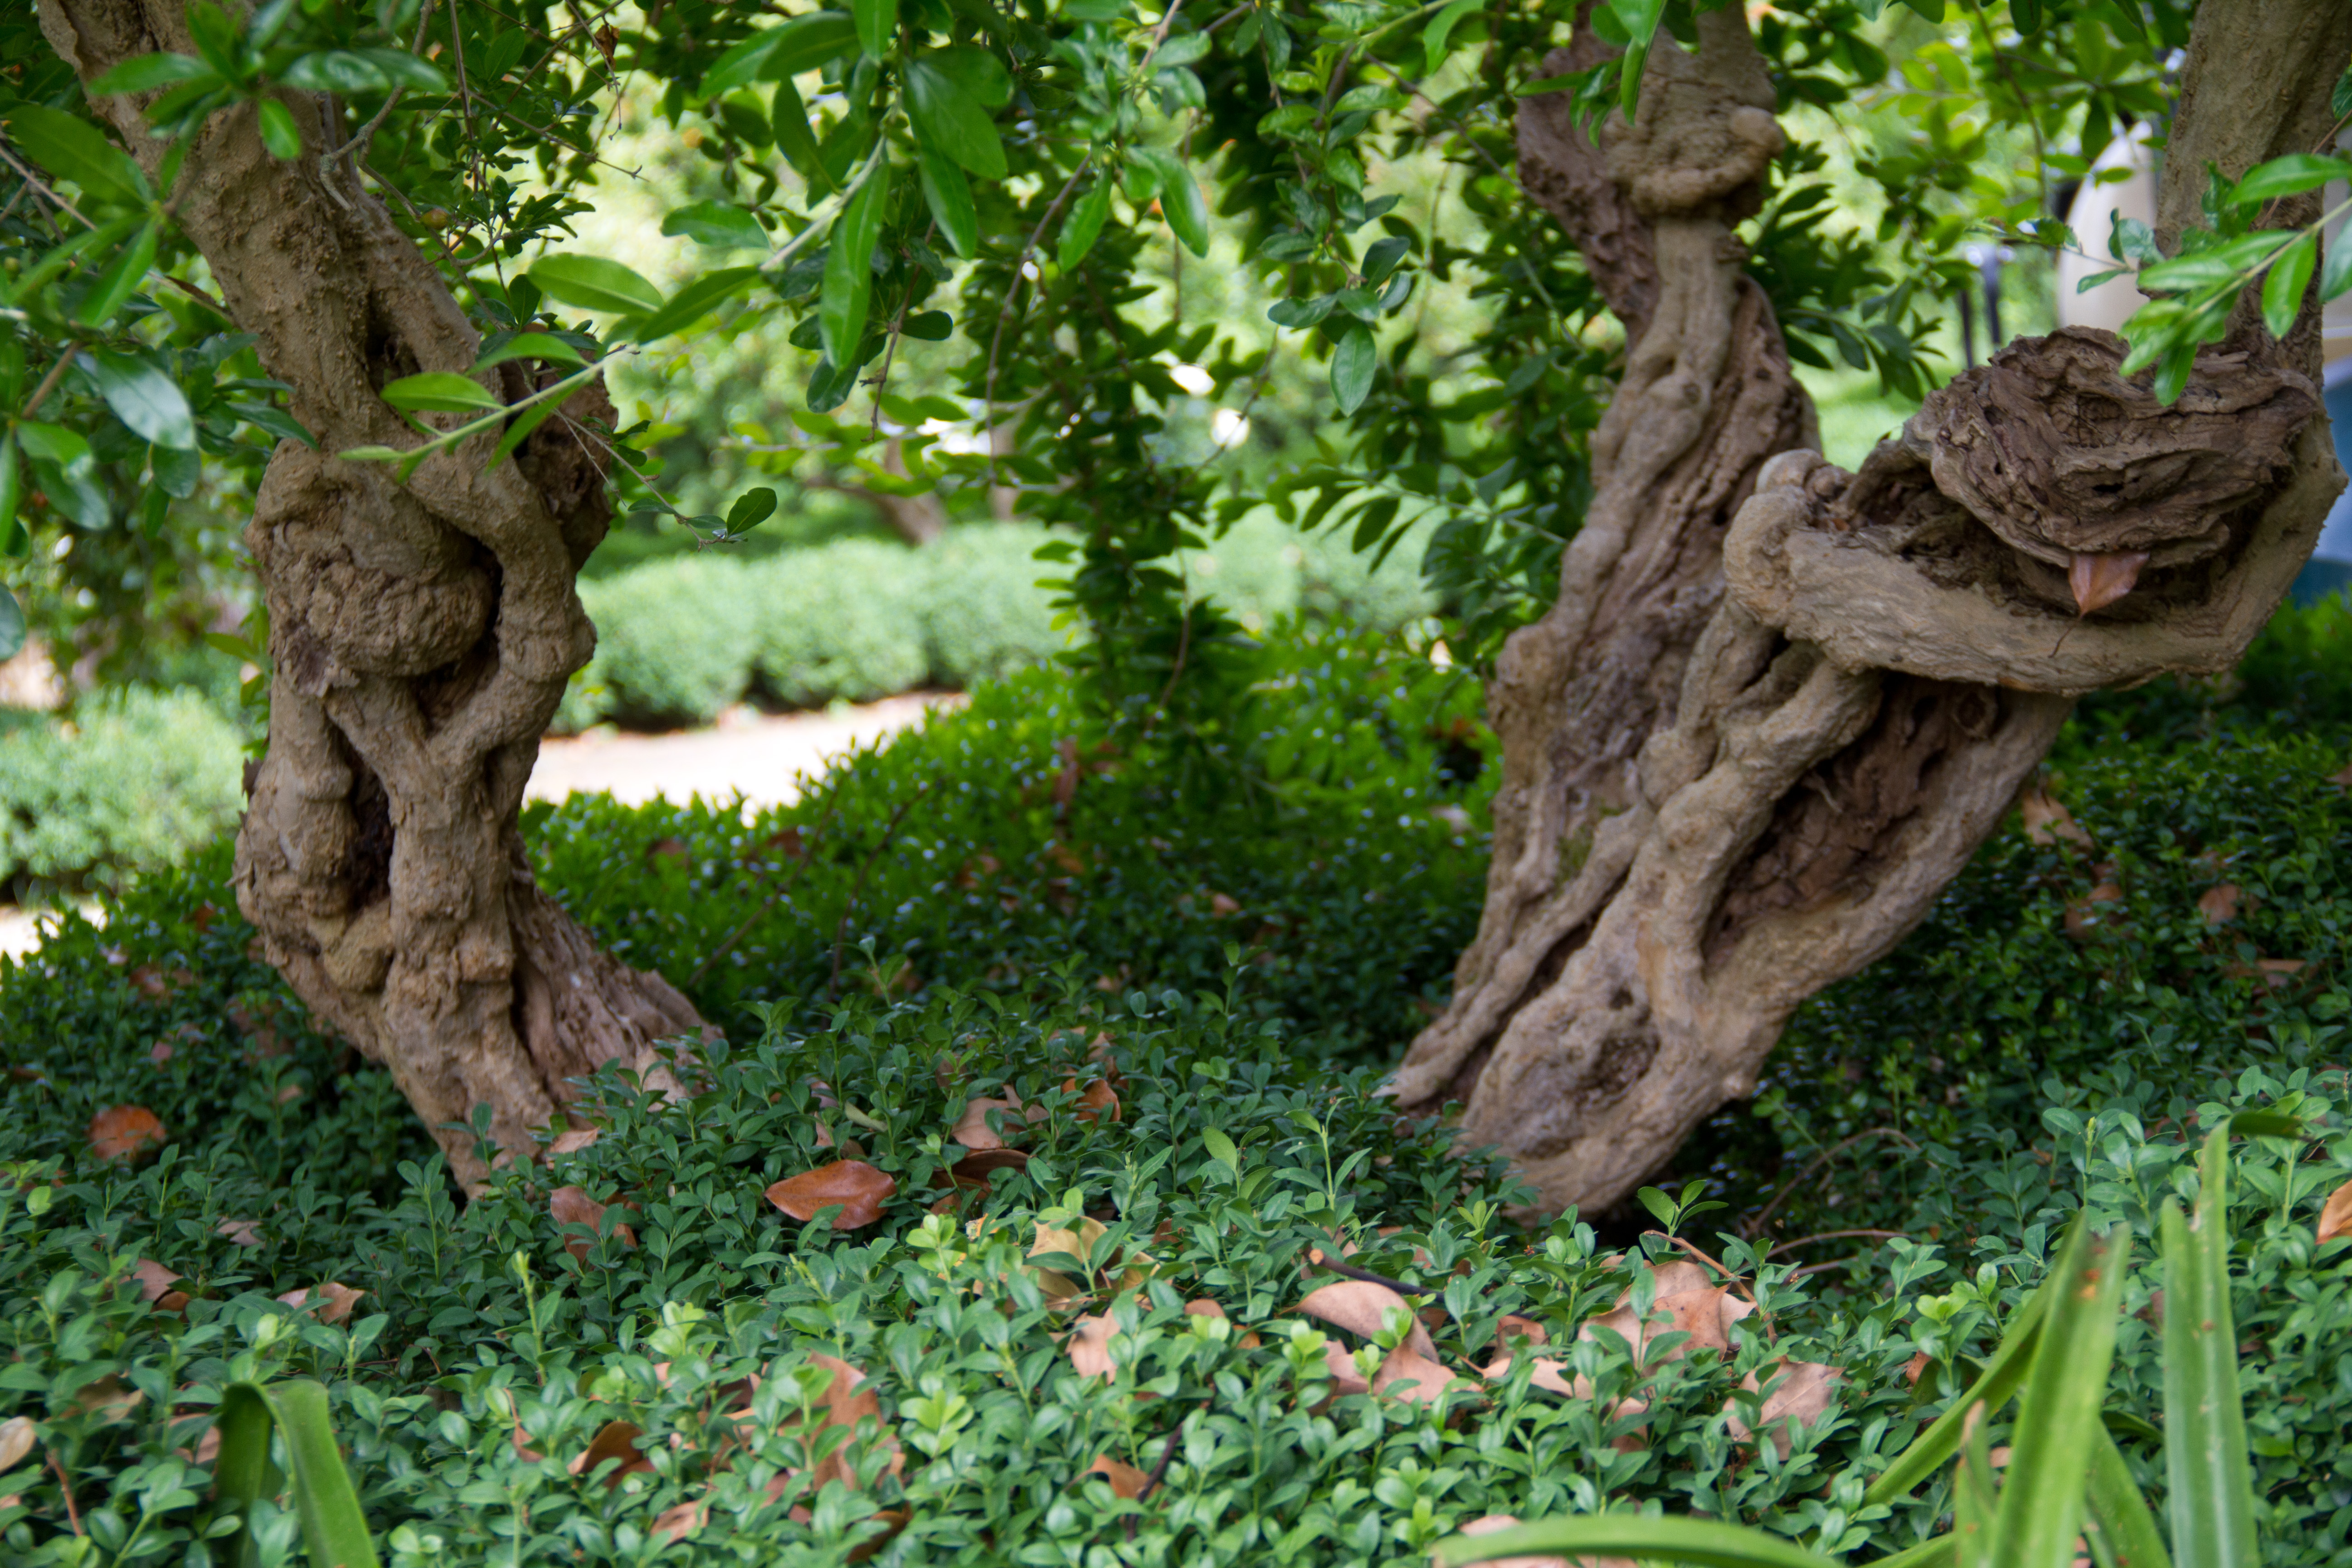 These ancient olive trees are in a private garden in the south of Italy.